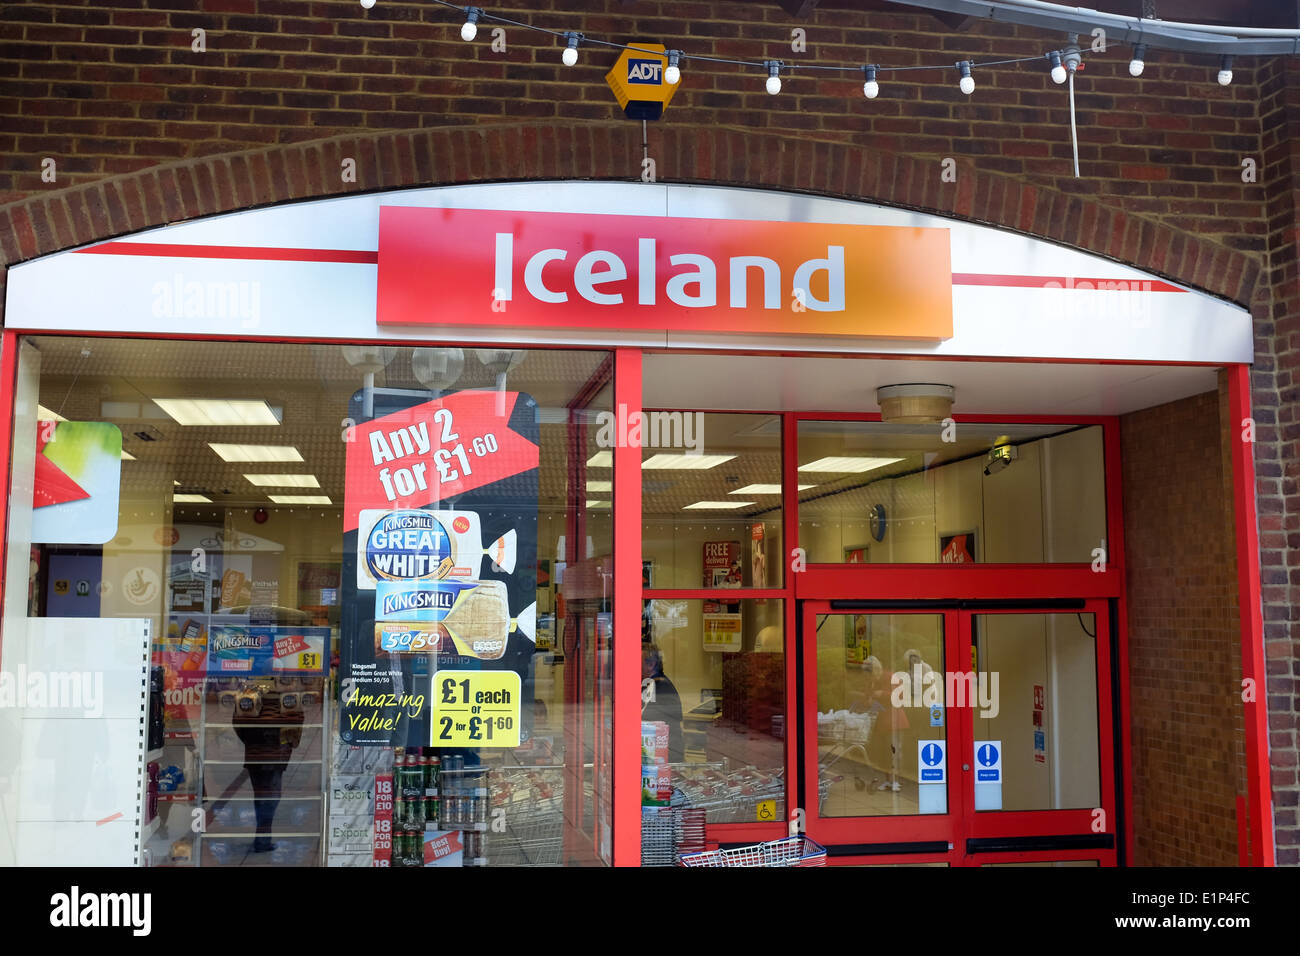 Exterior of an Iceland frozen food store in the UK. Stock Photo